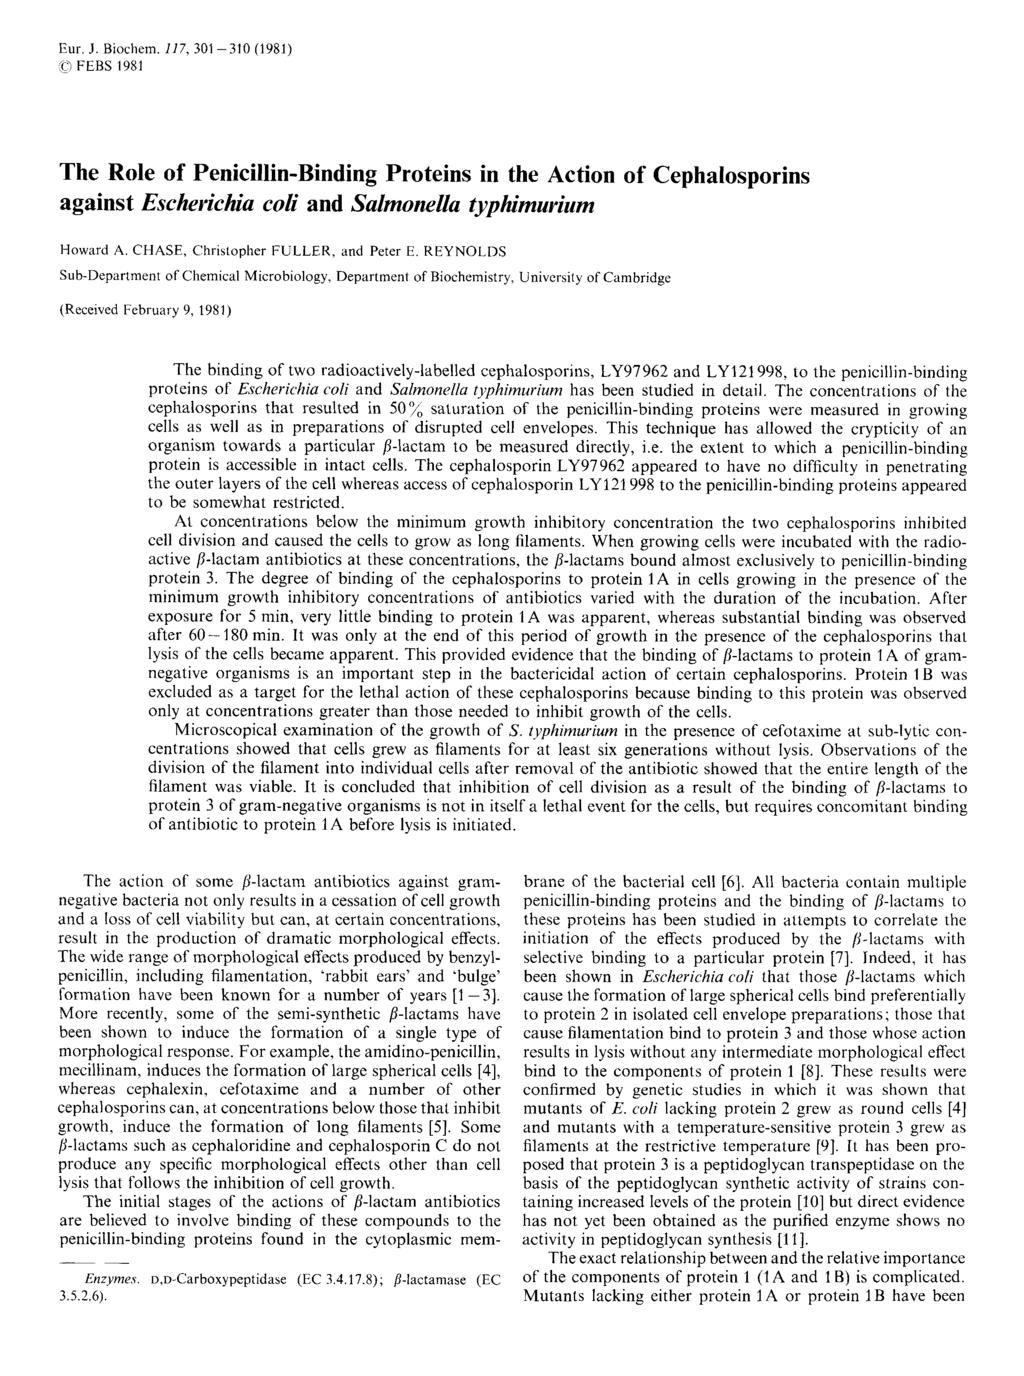 Eur. J. Biochem. 117, 301-310 (1981) FEBS 1981 The Role of Penicillin-Binding Proteins in the Action of Cephalosporins against Escherichia coli and Salmonella typhimurium Howard A.